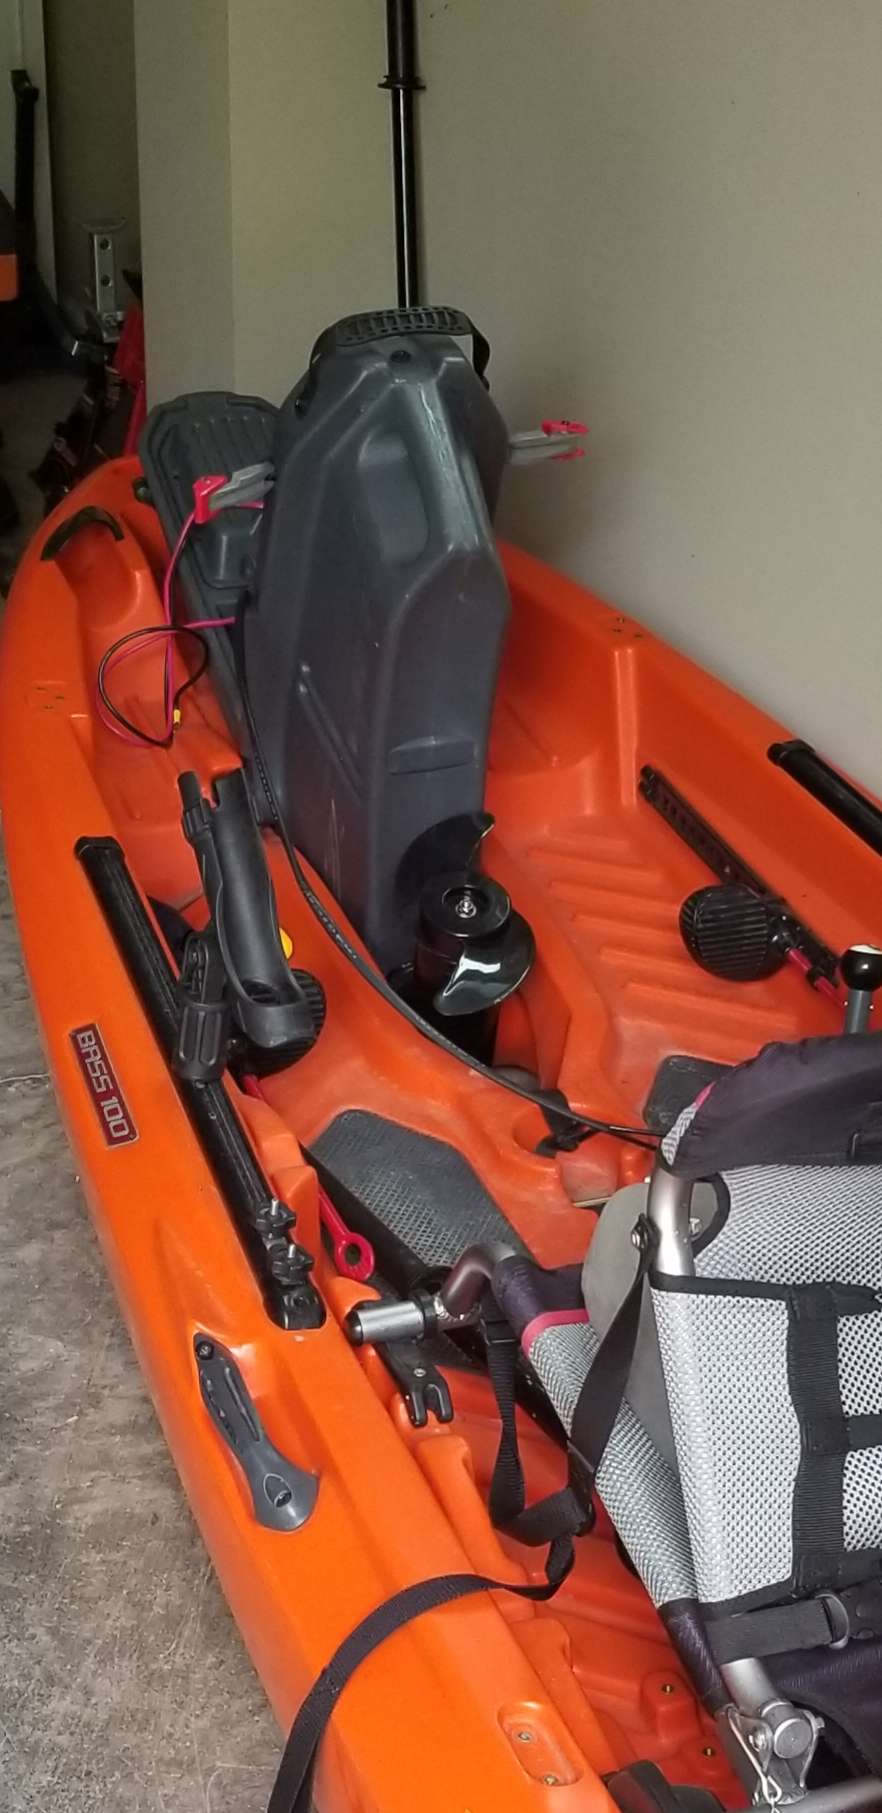 Best fishing kayak under $1,000? - Bass Boats, Canoes, Kayaks and more - Bass  Fishing Forums